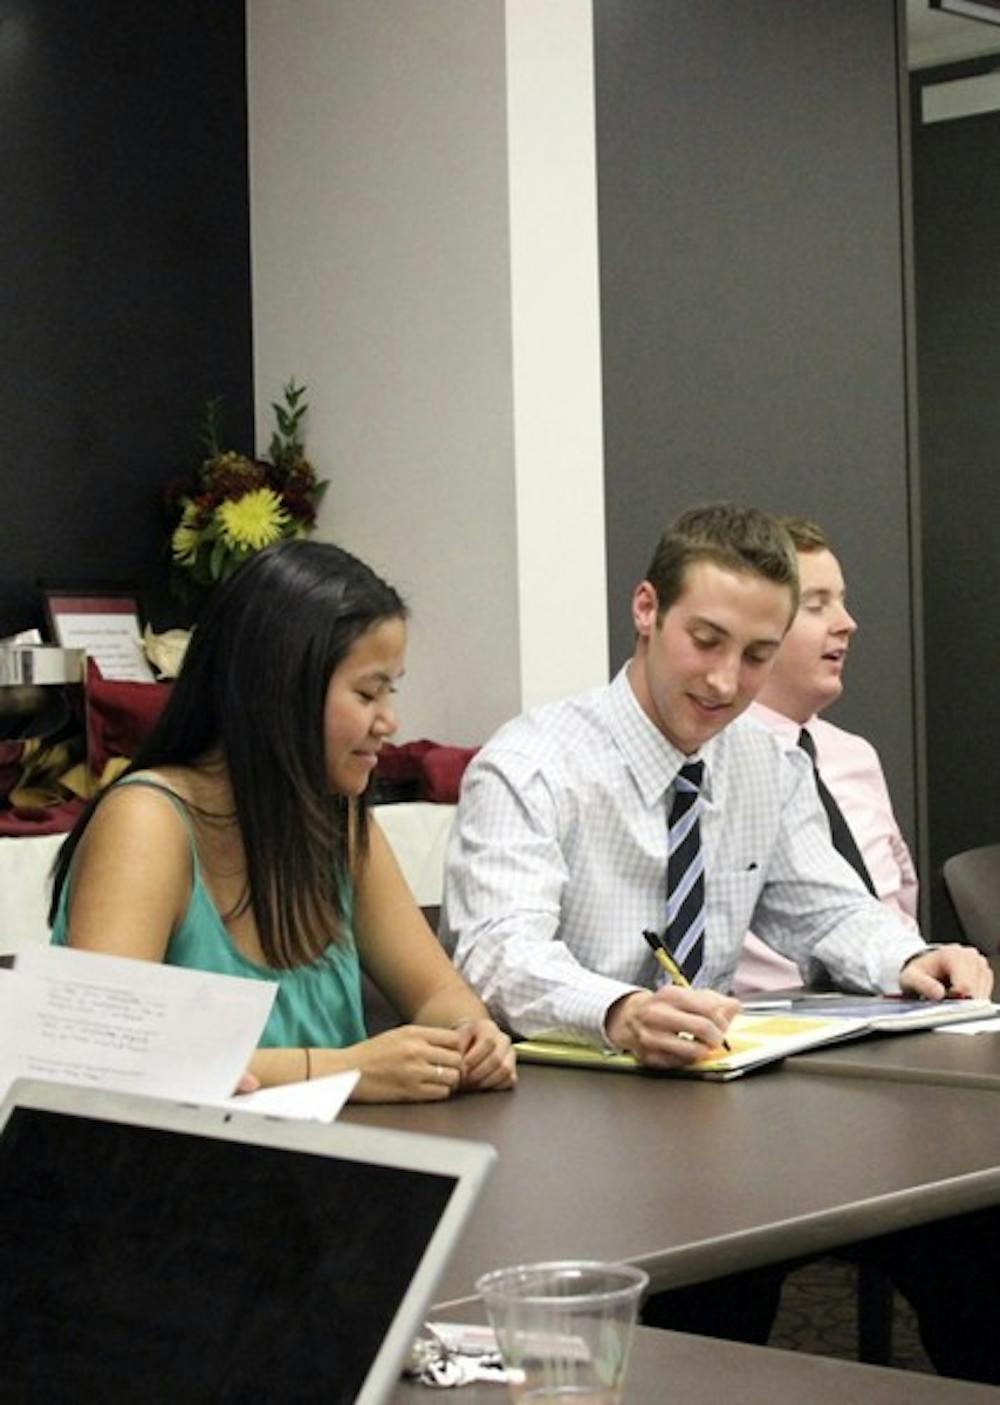 STUDENT LEADERS: Tina Mounlavongsy, USG President Jacob Goulding, and James Baumer address the senate at a USG meeting Tuesday evening to discuss several topics, including adding more emergency light boxes on campus as a preventative measure. (Photo by Sam Rosenbaum)